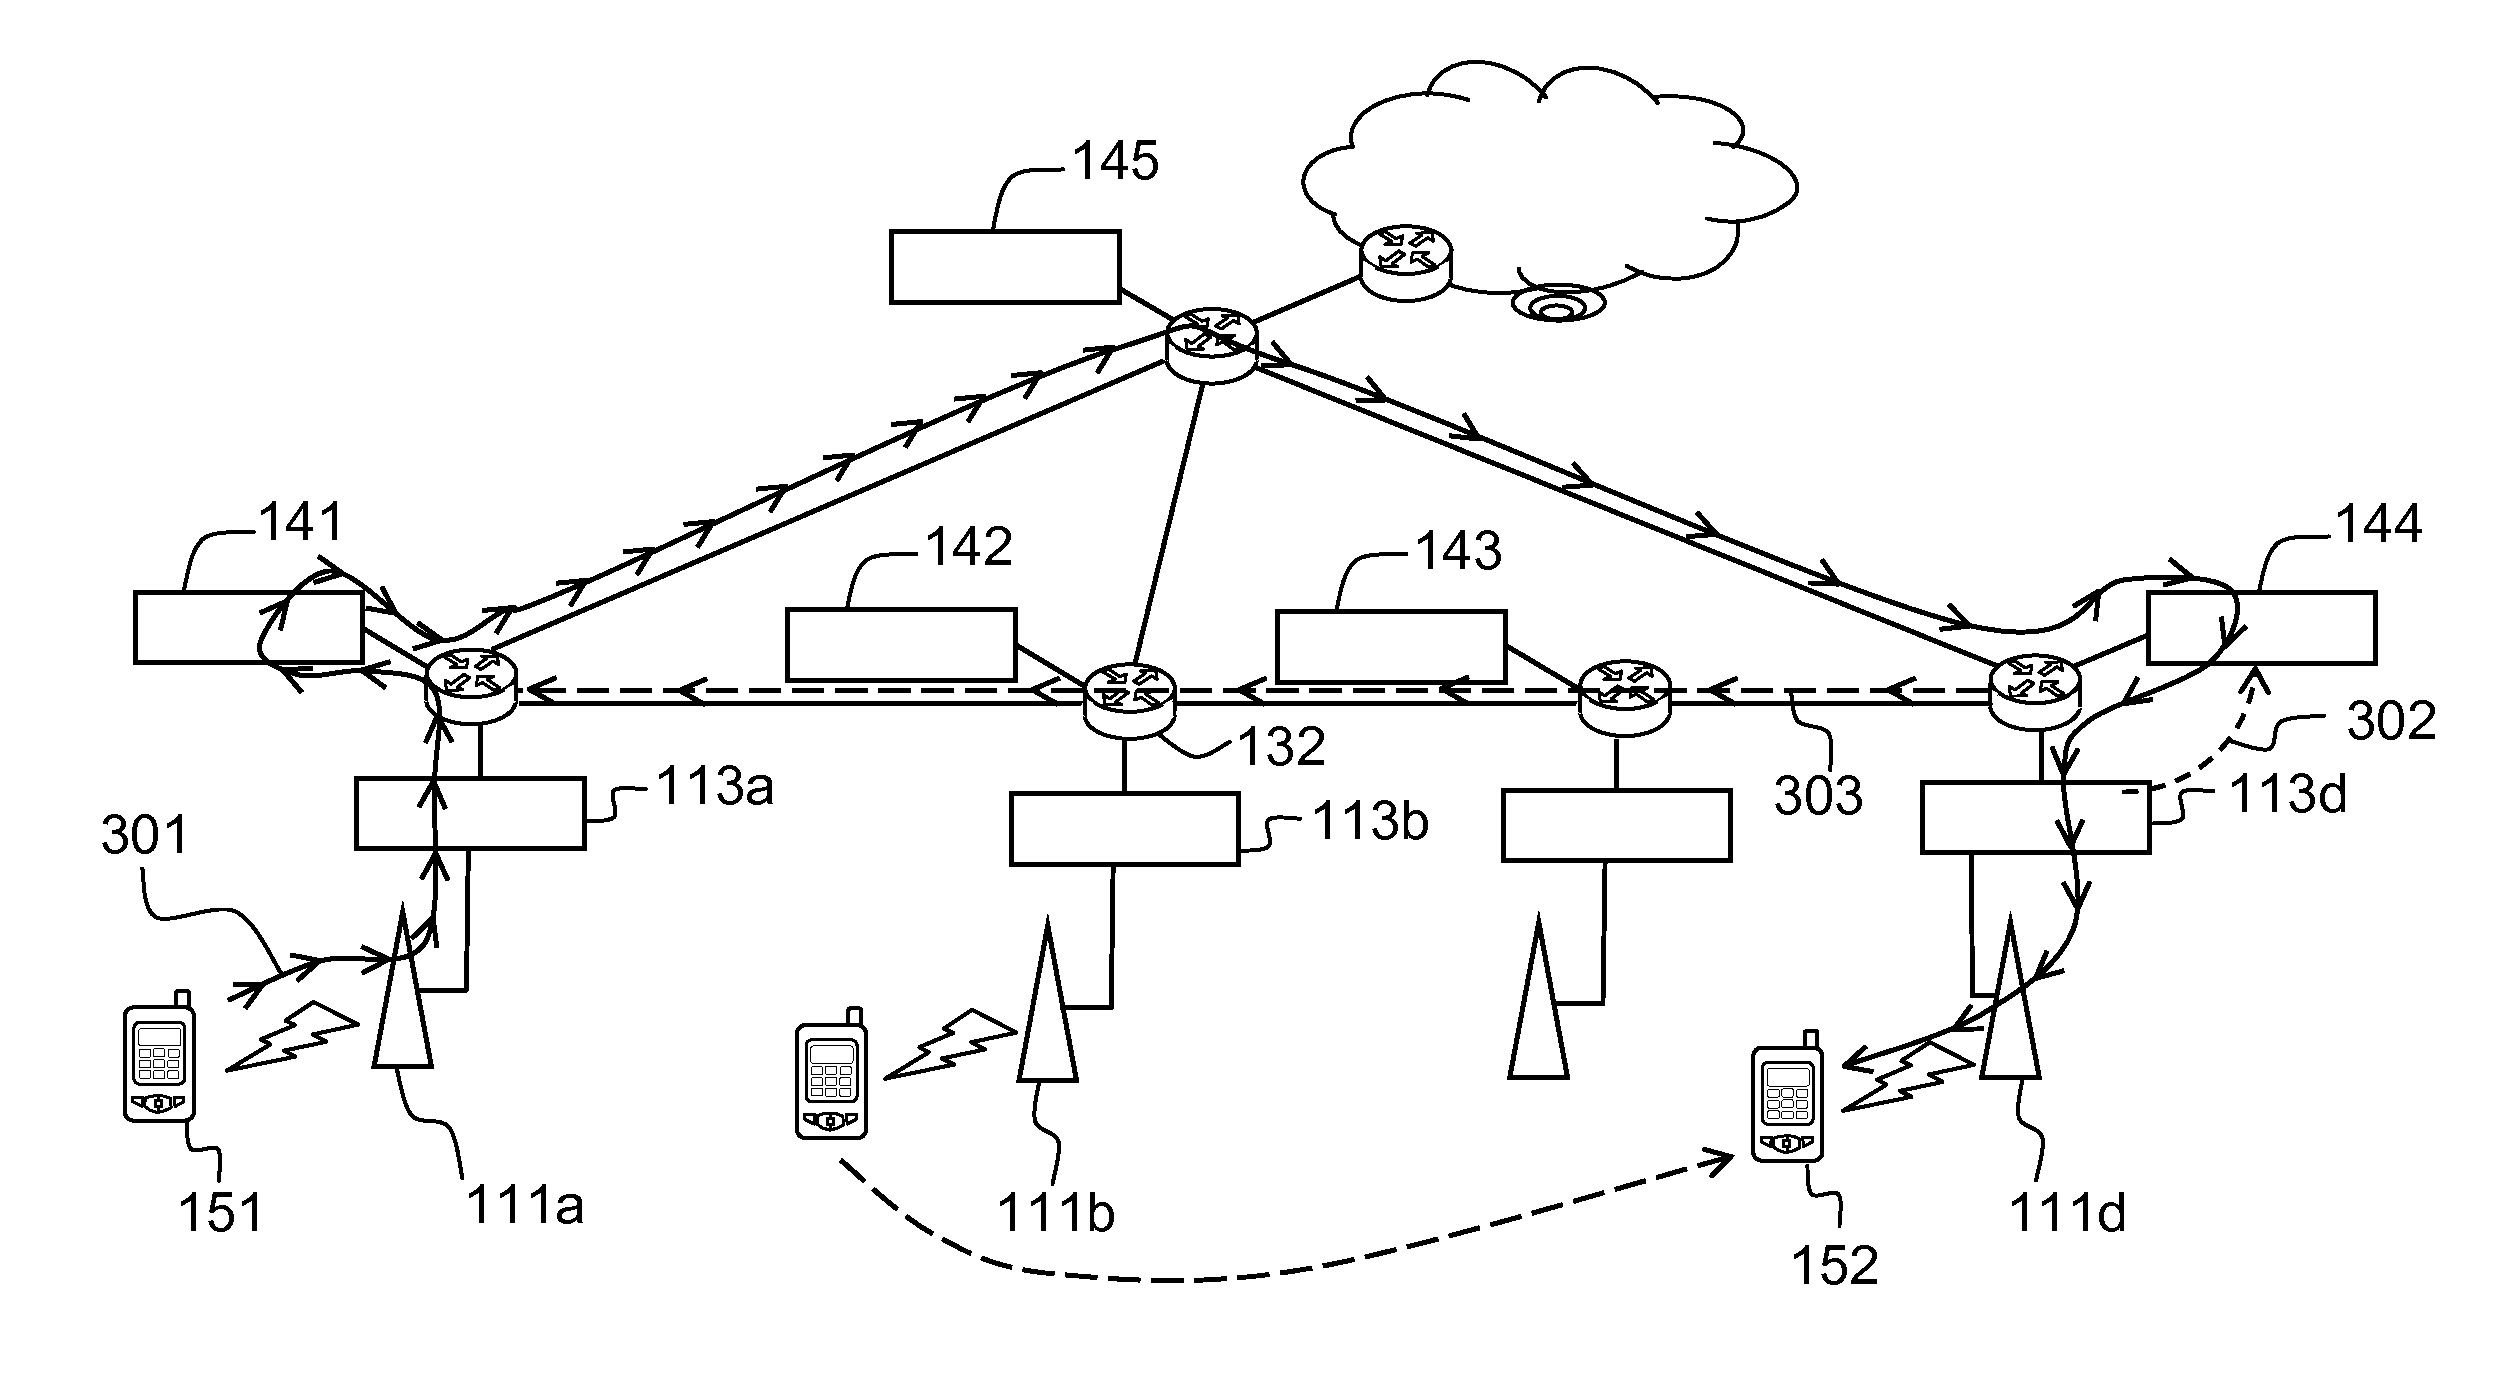 Method for Enhancing the Reliability of the Continuity of the Communications Operated from a 4G Mobile Terminal Linked to an IP Interconnection Network